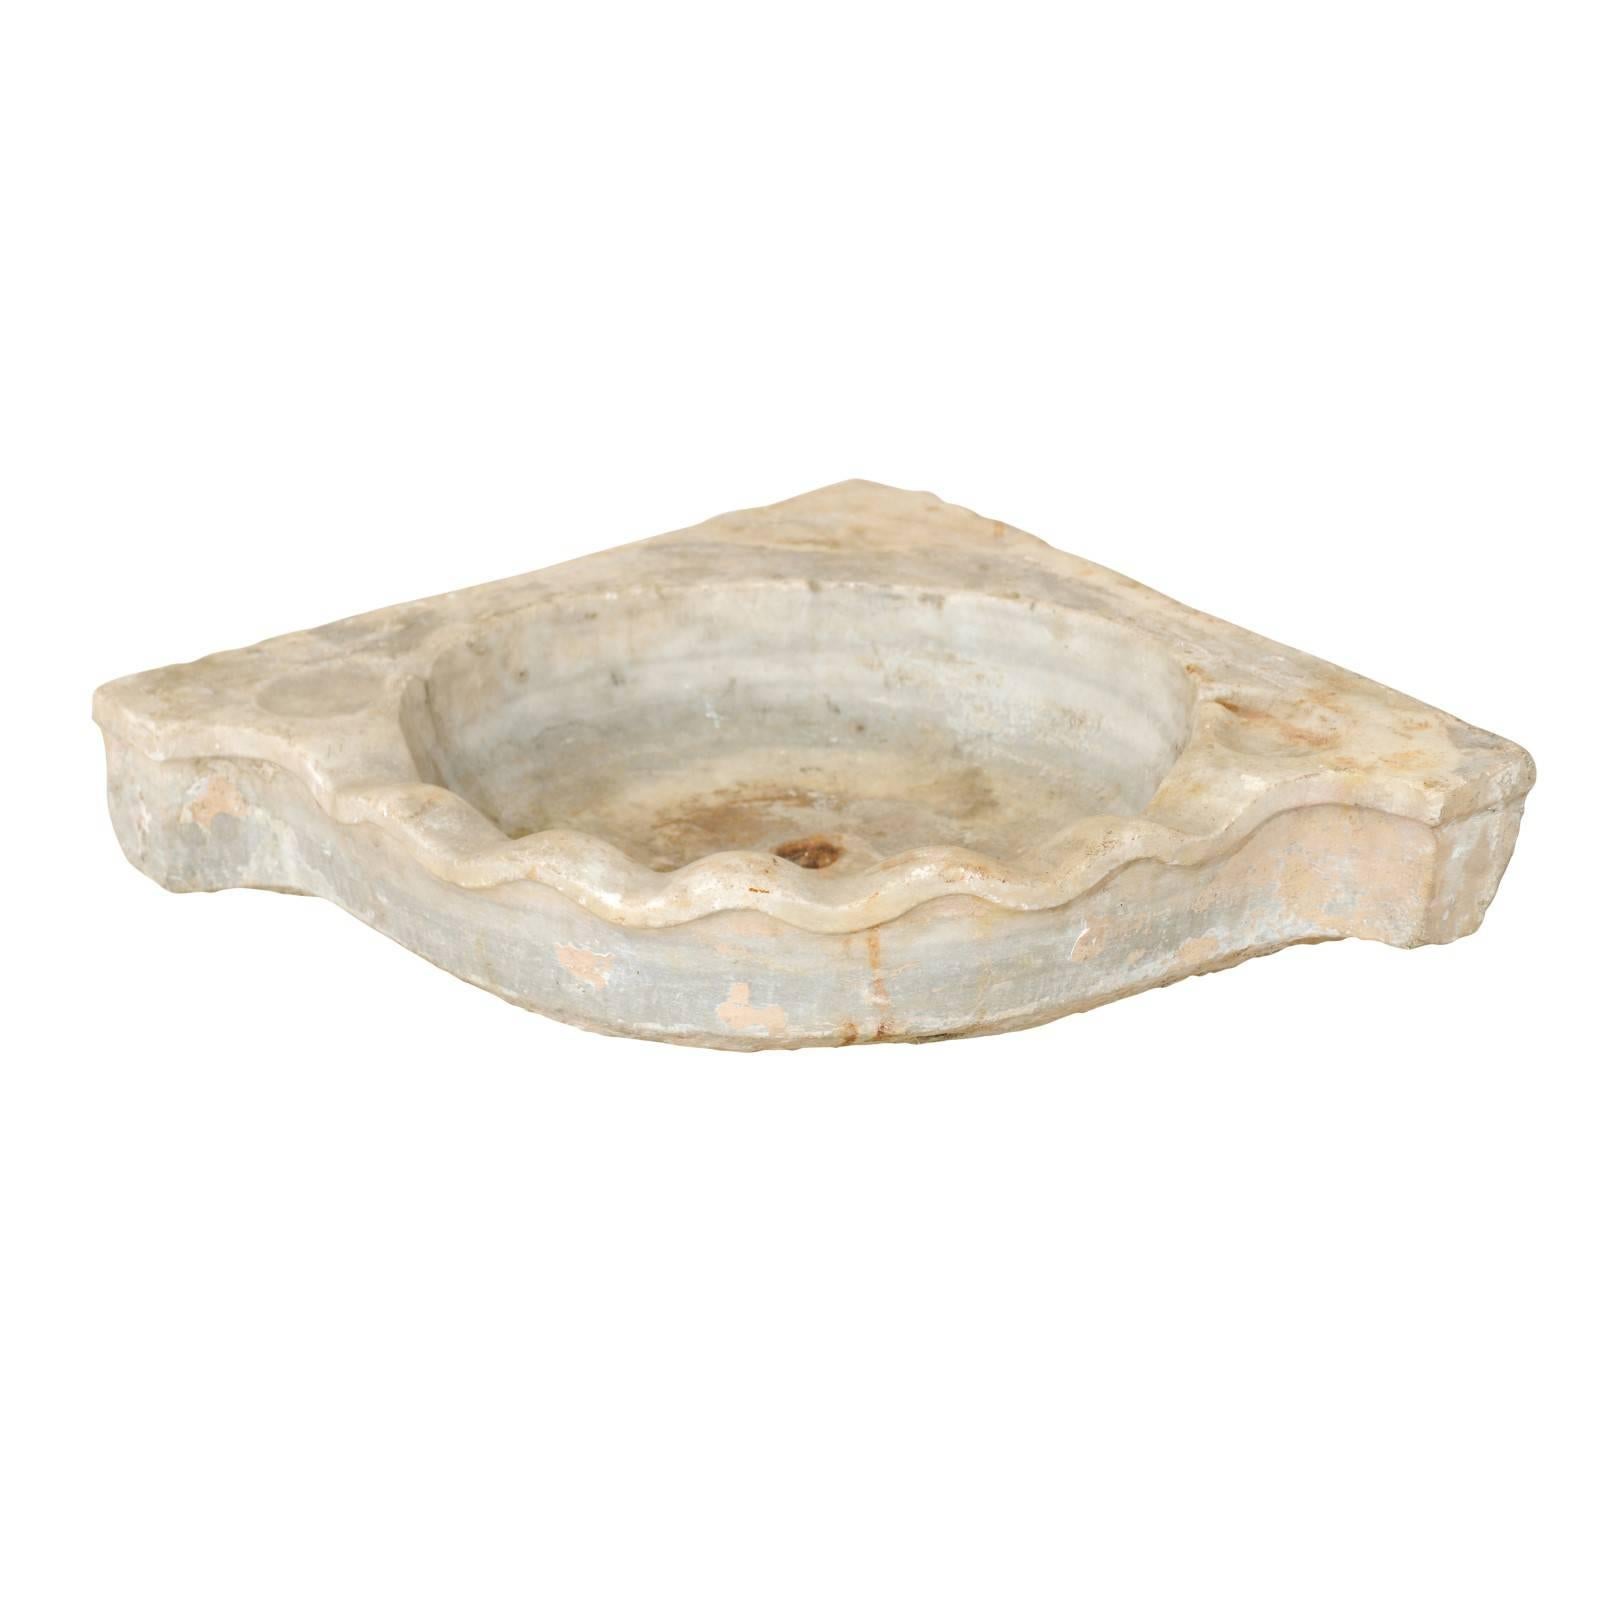 19th Century European Marble Corner Sink with Stylized Sea Shell Shape in Front